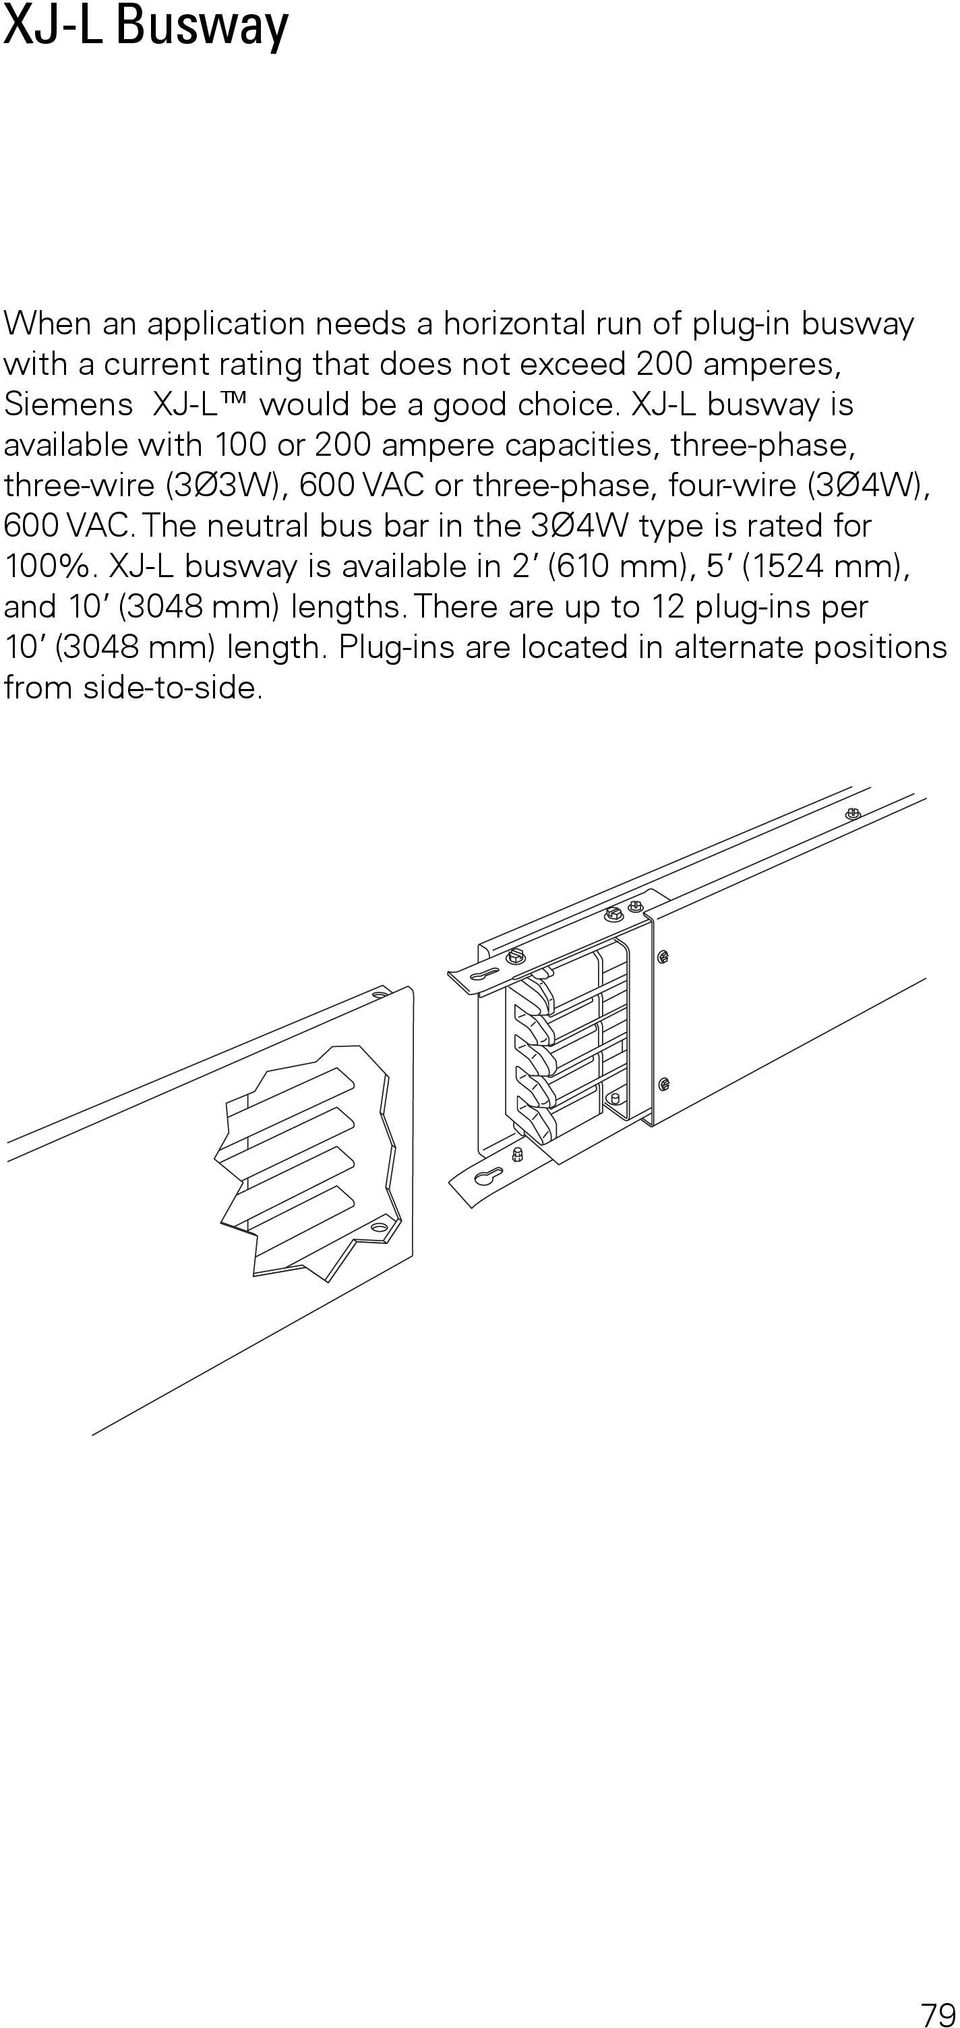 XJ-L busway is available with 100 or 200 ampere capacities, three-phase, three-wire (3Ø3W), 600 VAC or three-phase, four-wire (3Ø4W), 600